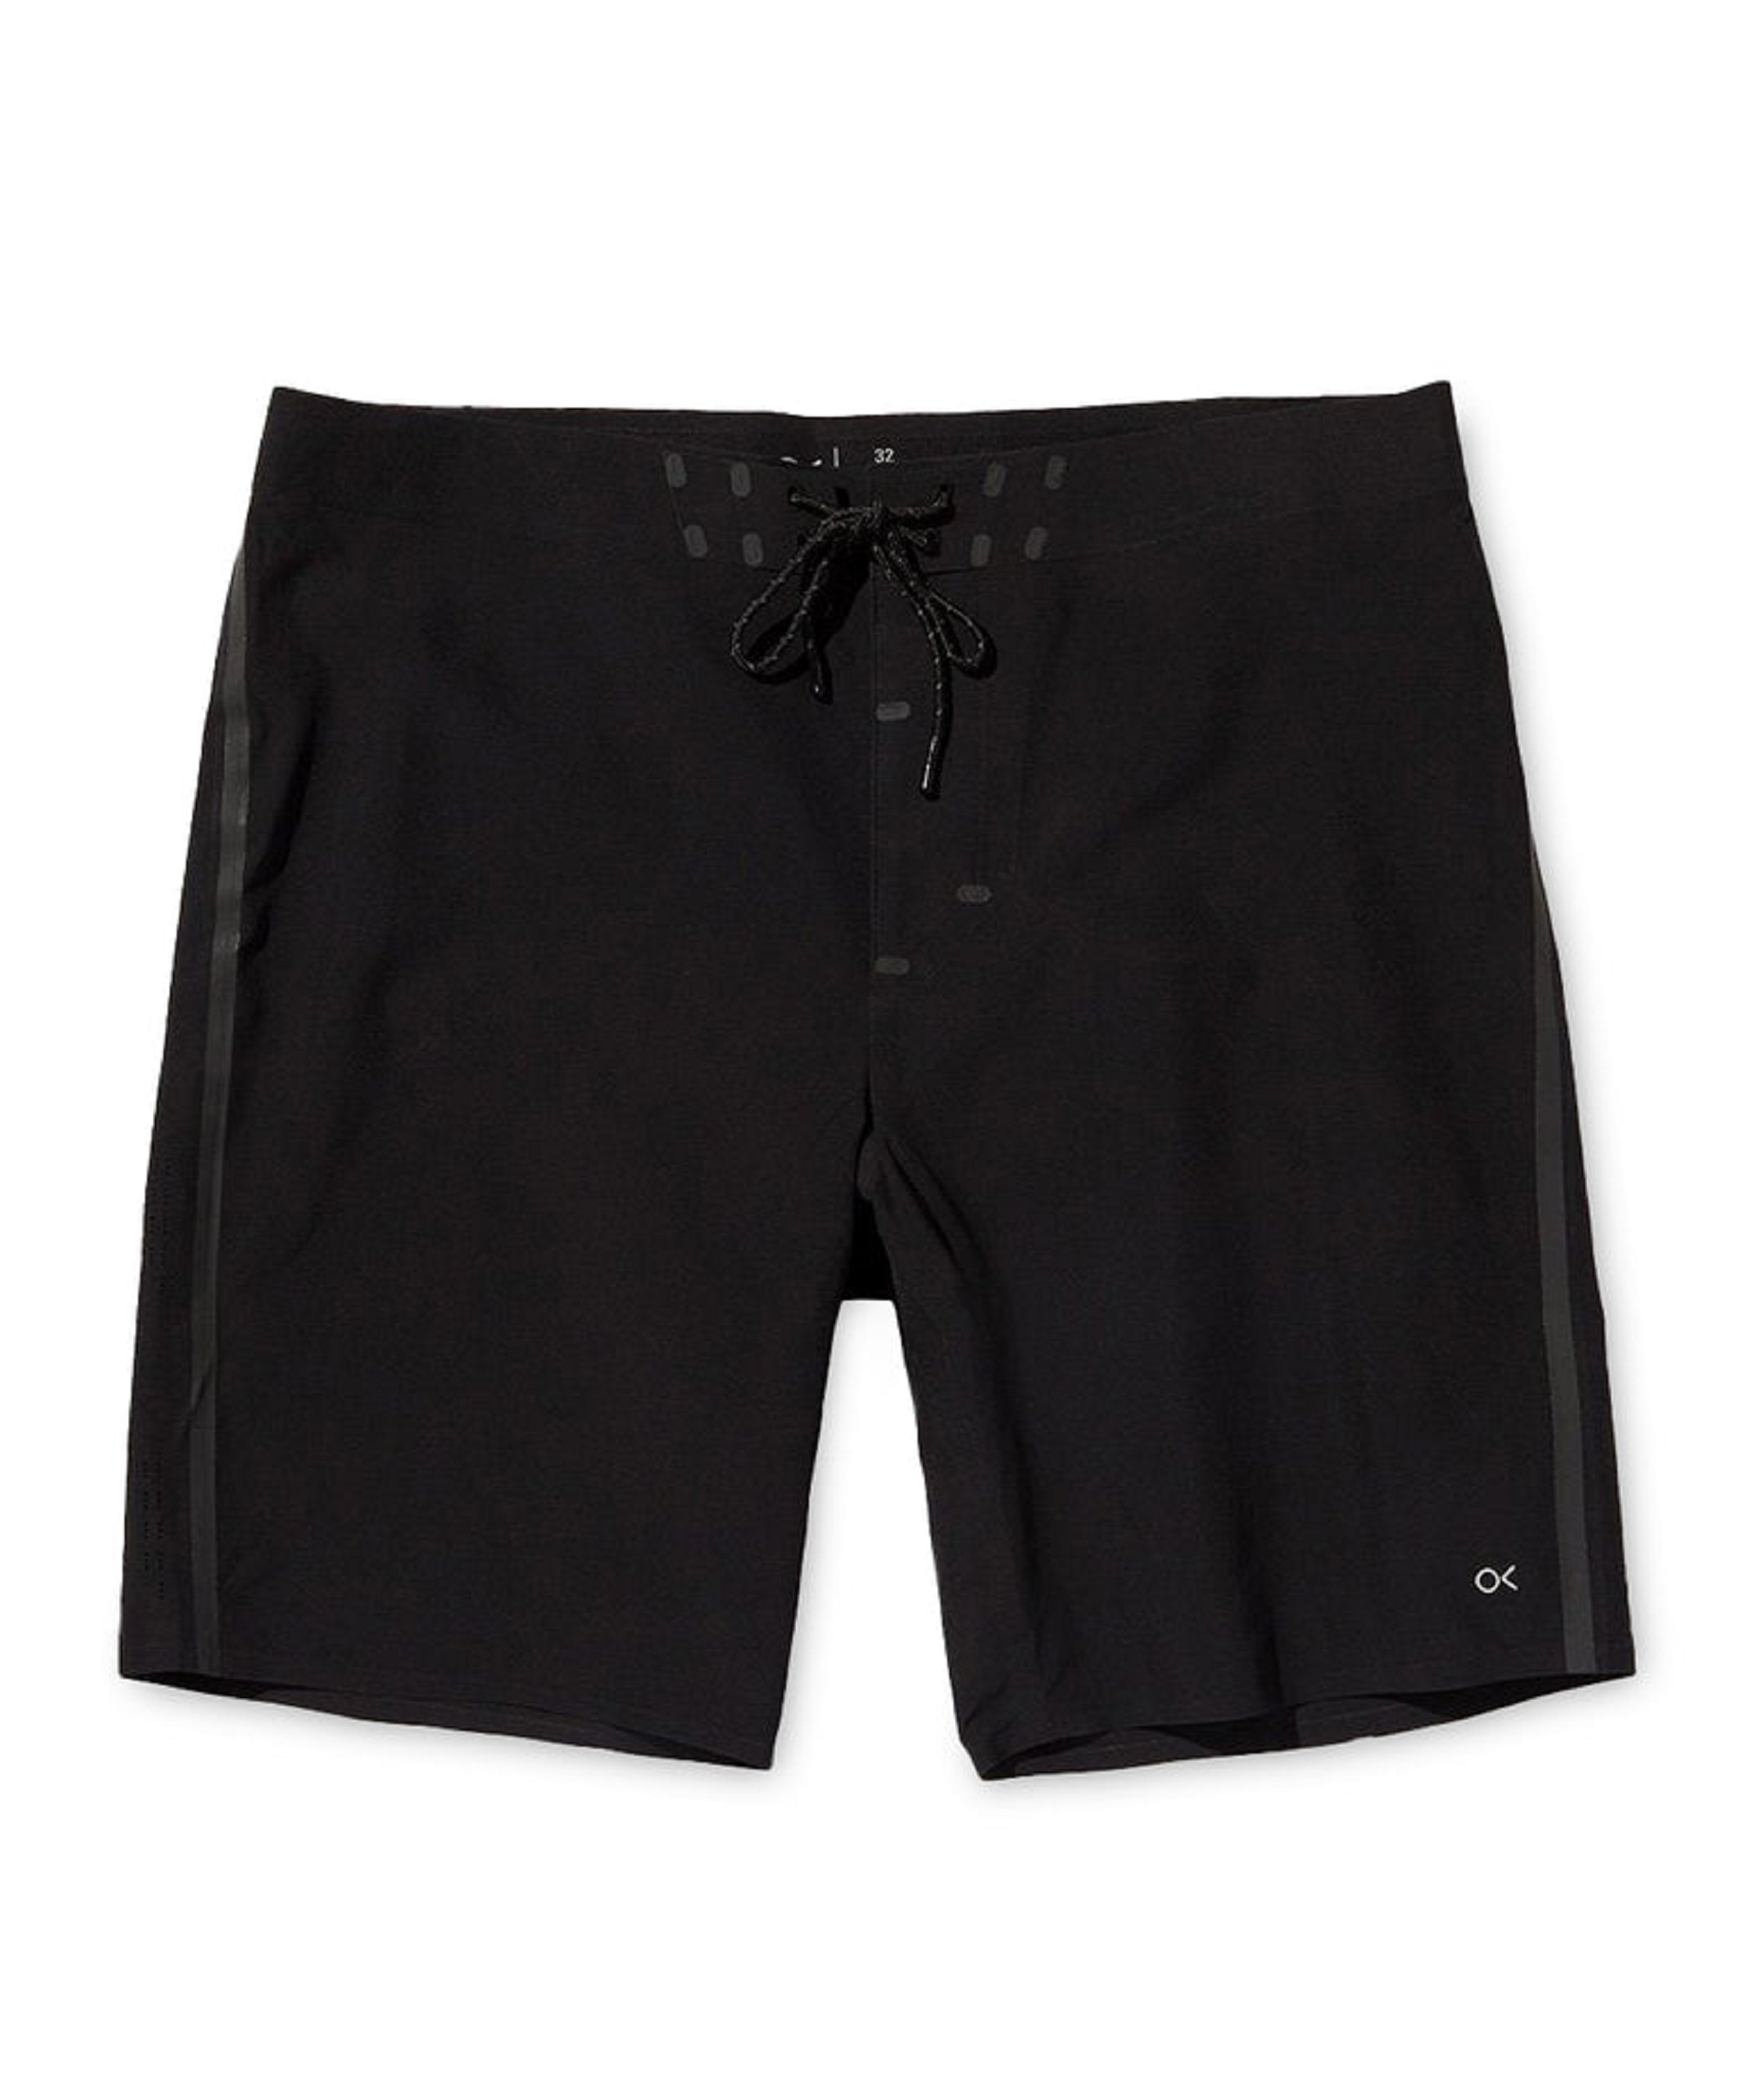 Outerknown board shorts against white background